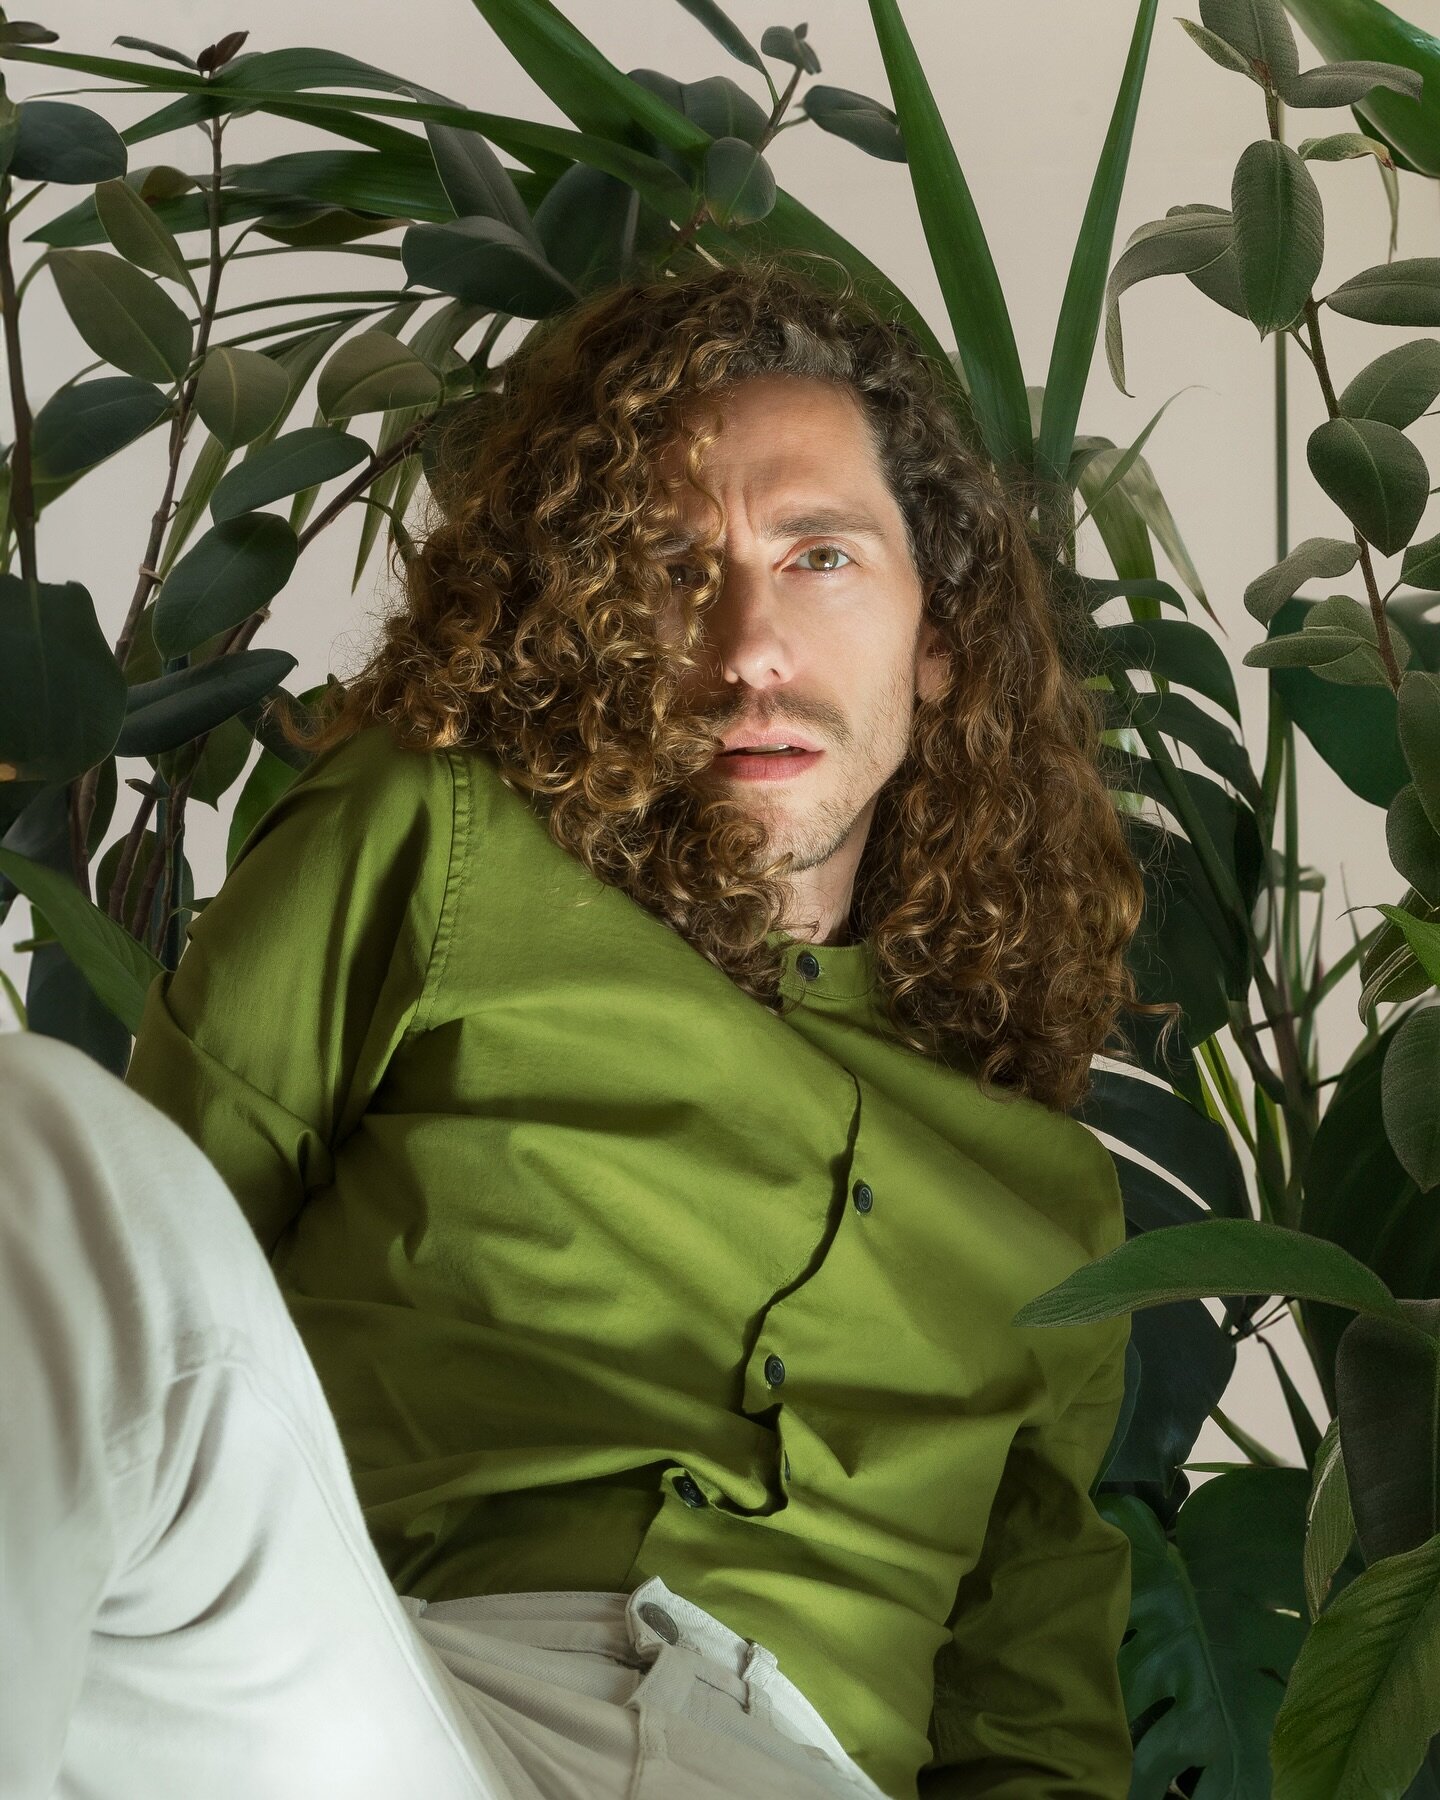 It&rsquo;s about time 🌿 2024-03
📸 &copy;www.florianlevy.com
&bull;
#selfportrait #supergreen #menwithcurls #menwithplants #boyswithplants #plantdaddy #malemodel